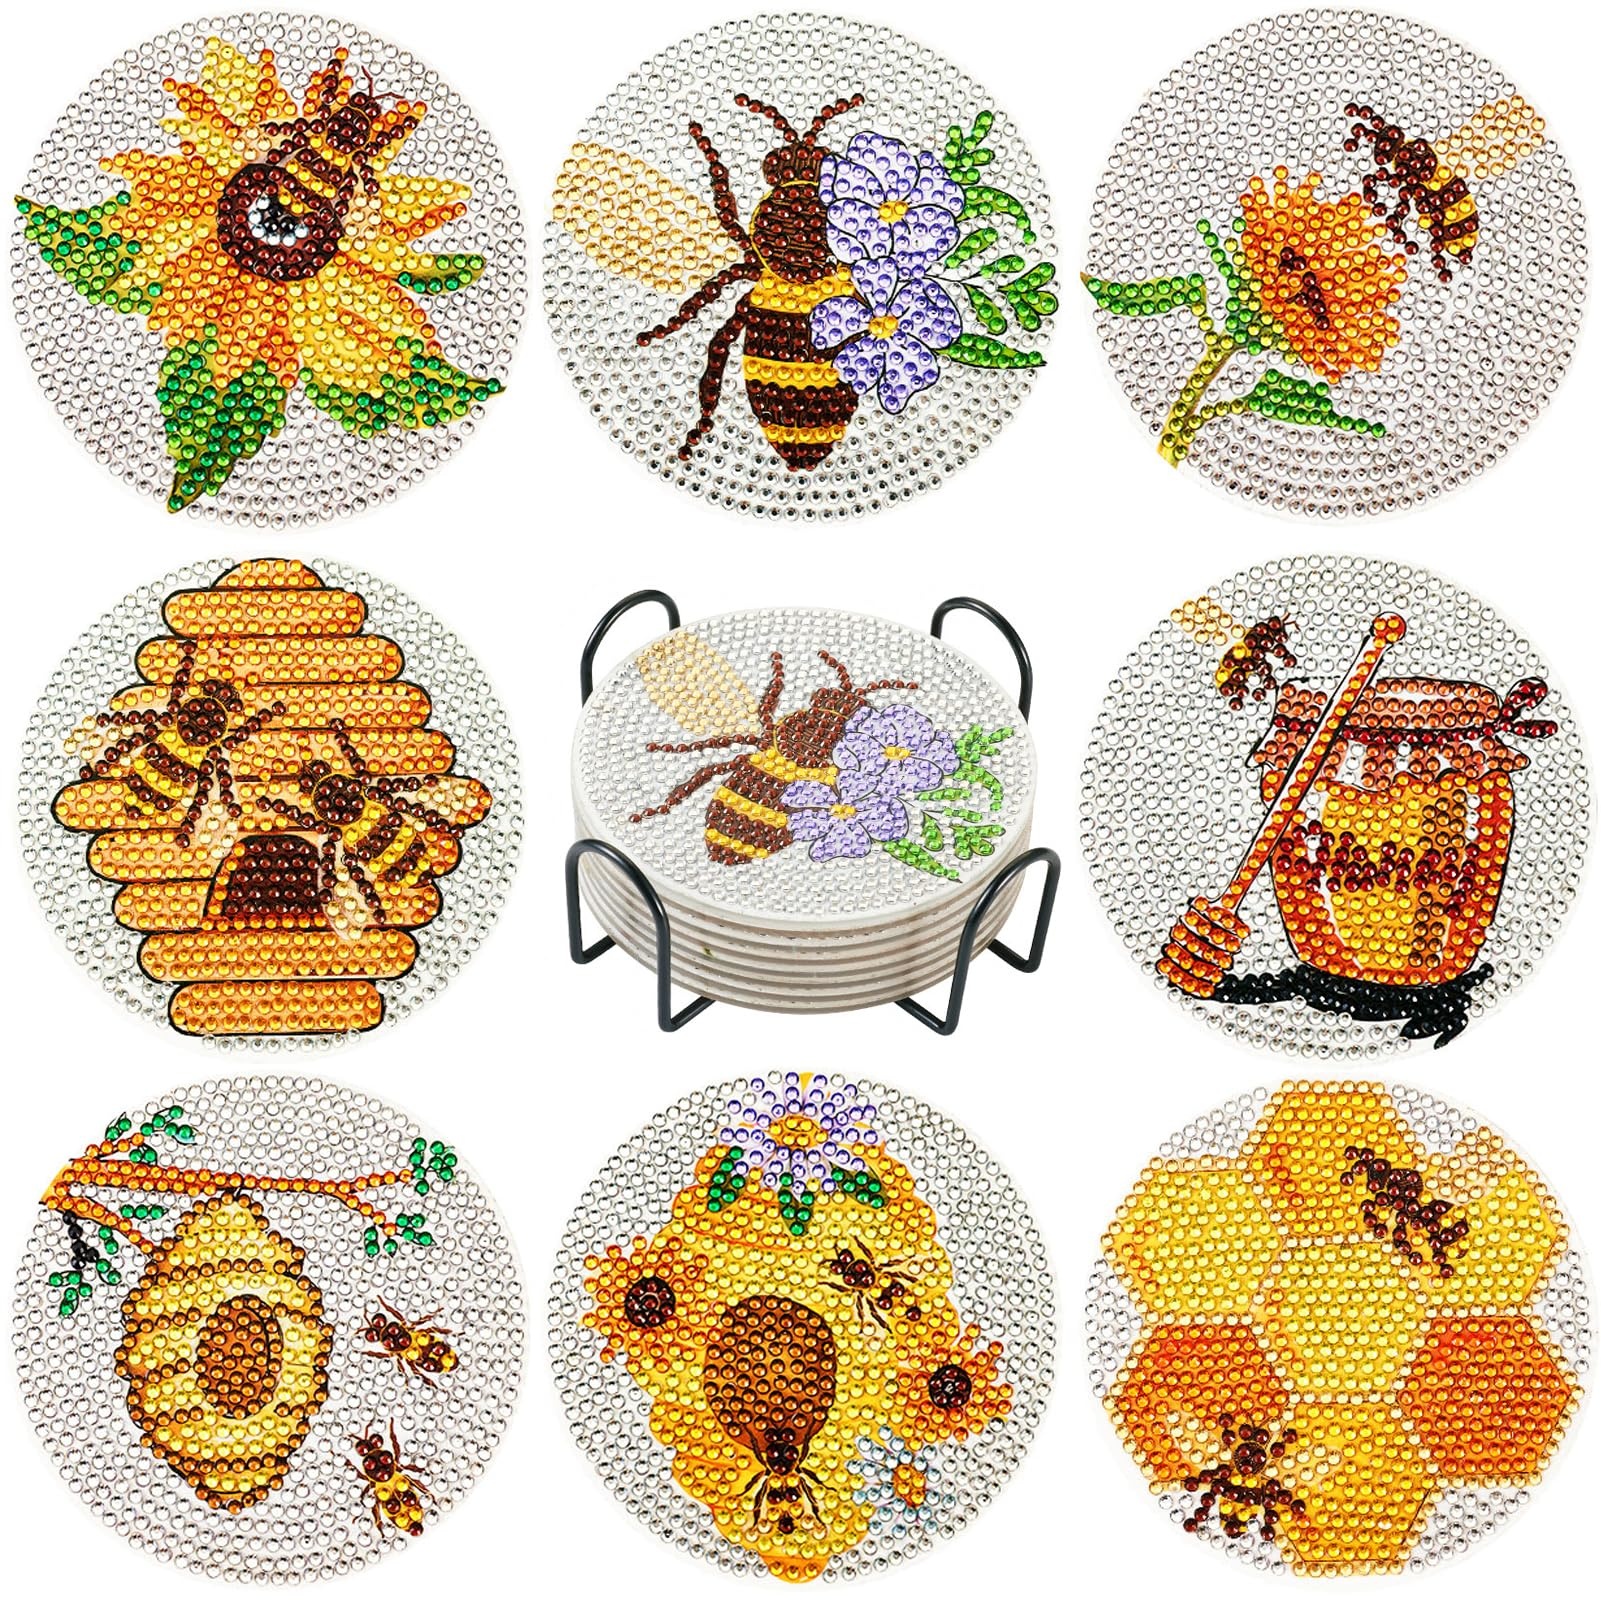 Craftdady 8Pcs Bee Diamond Coaster Honey Comb Diamond Painting with Holder Adult DIY Kit Round Coaster for Crafting Dining Table Bar Coffee Bar Decoration